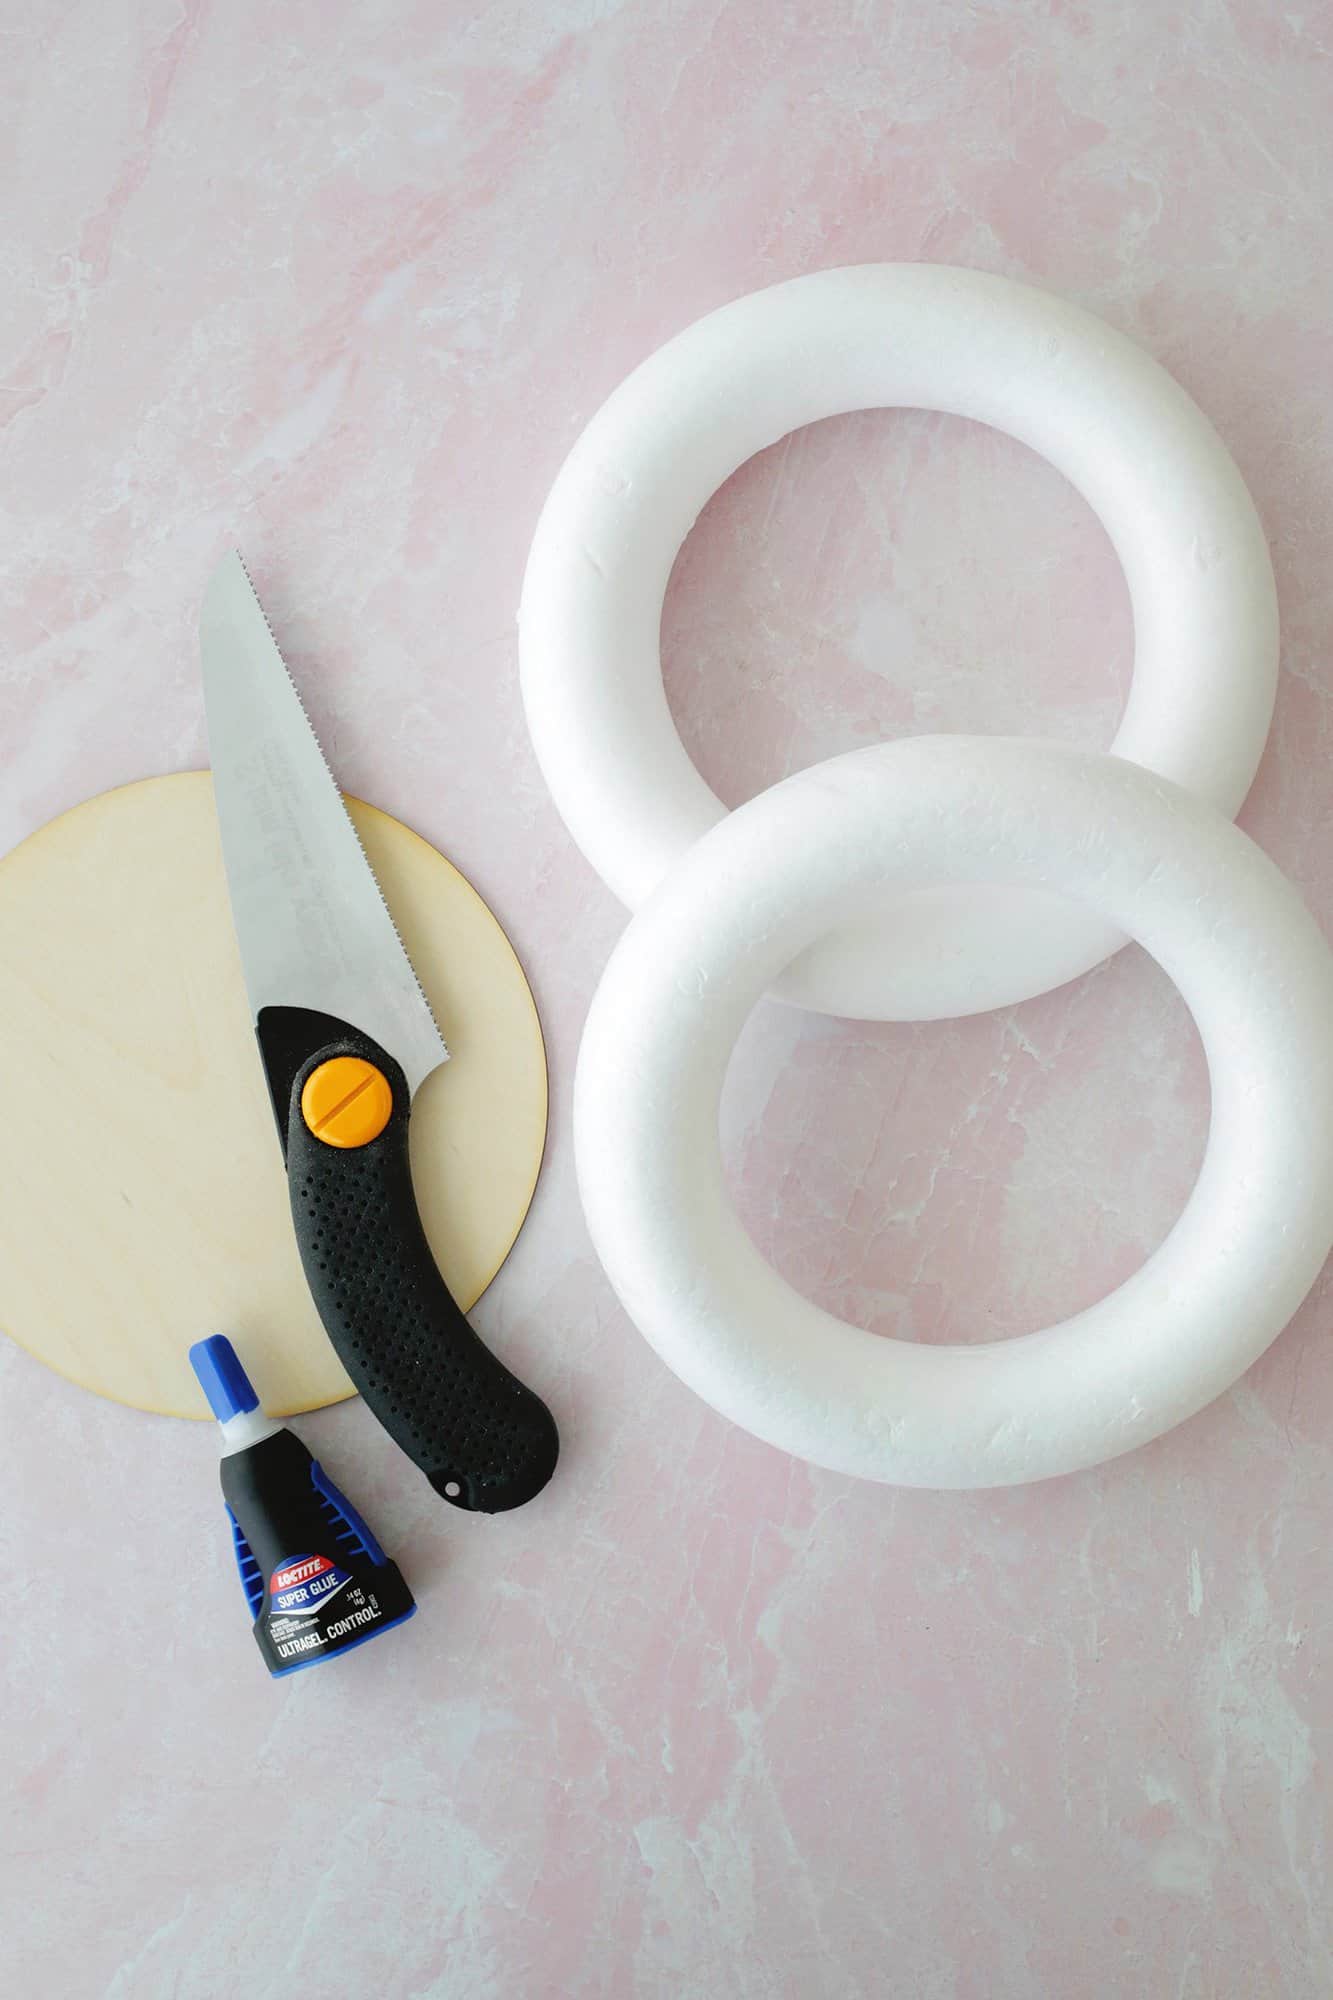 foam wreath rings, a wooden circle, and glue and a hand saw